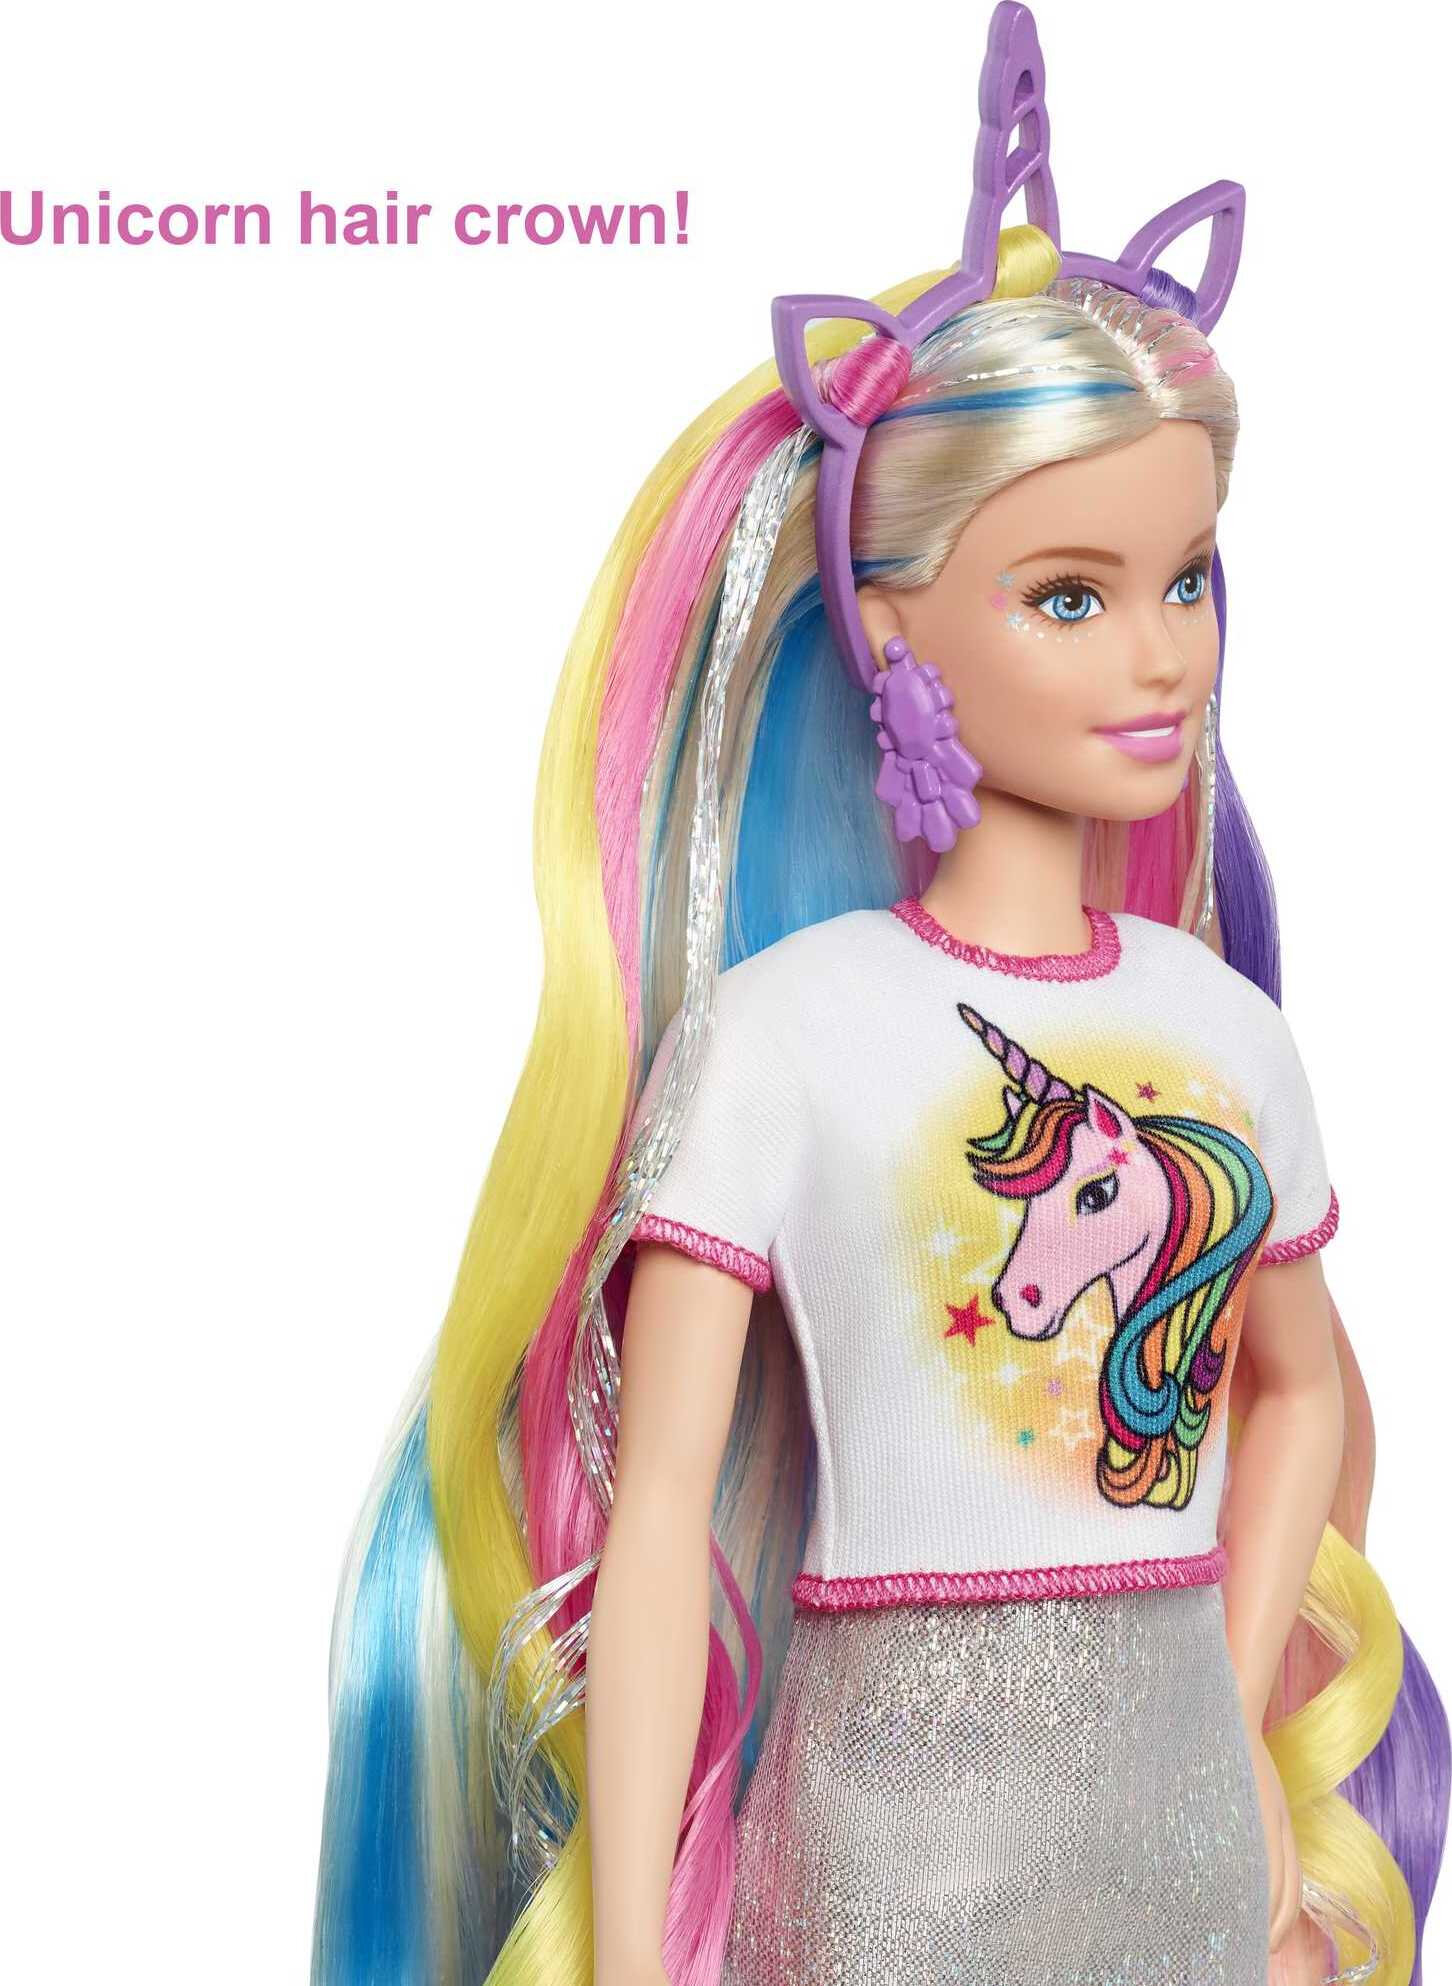 Barbie Fantasy Hair Fashion Doll with Colorful Blonde Hair, Accessories and Clothes - image 5 of 6